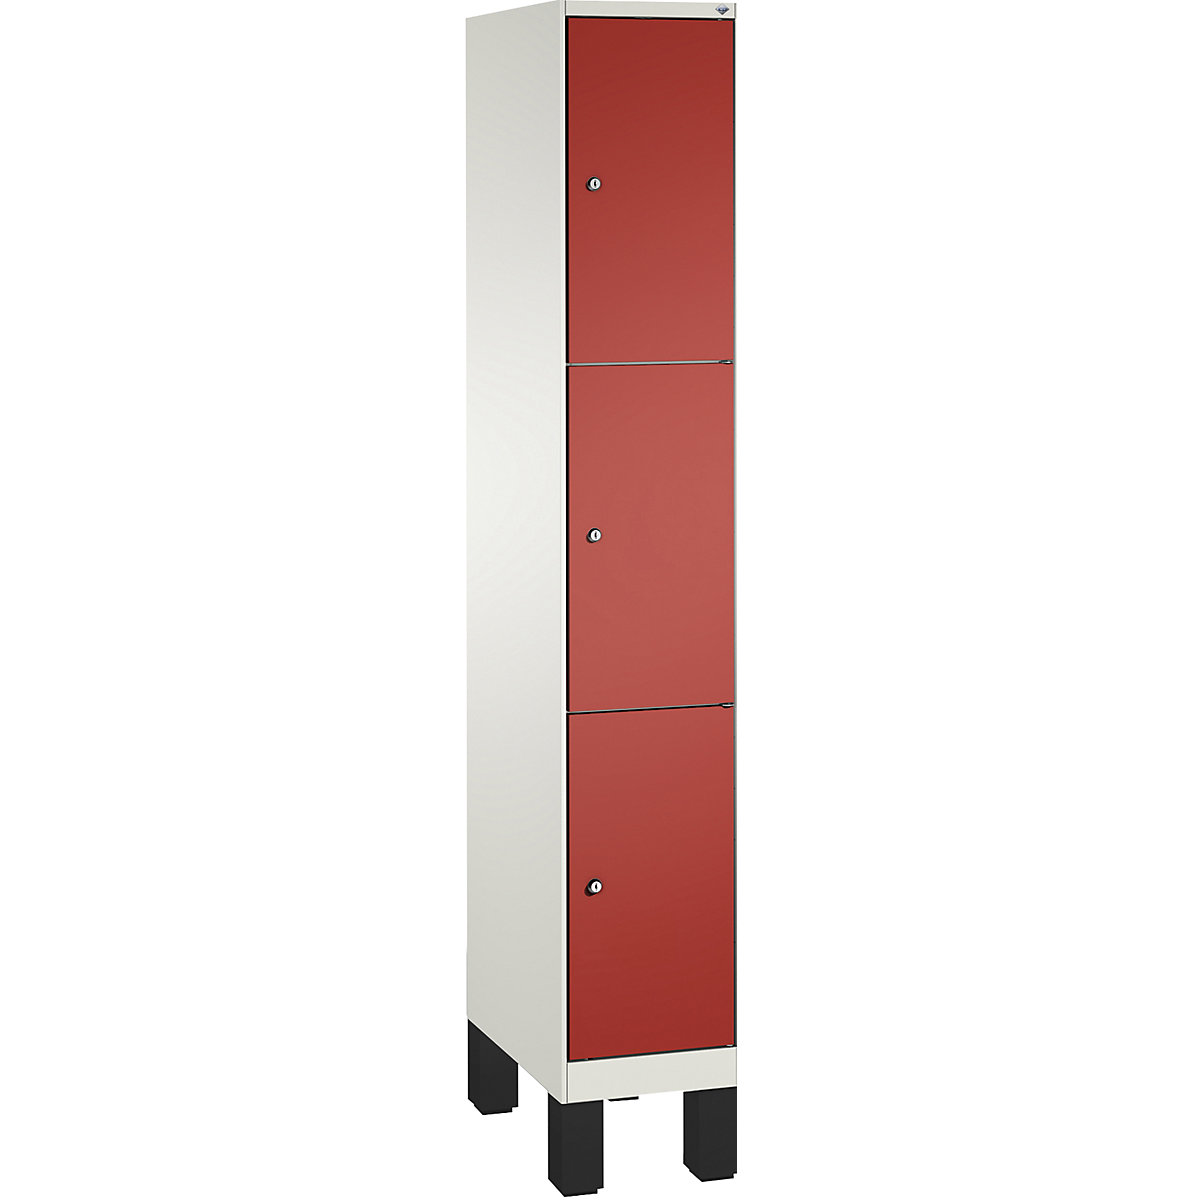 EVOLO locker unit, with feet – C+P, 1 compartment, 3 shelf compartments, compartment width 300 mm, traffic white / flame red